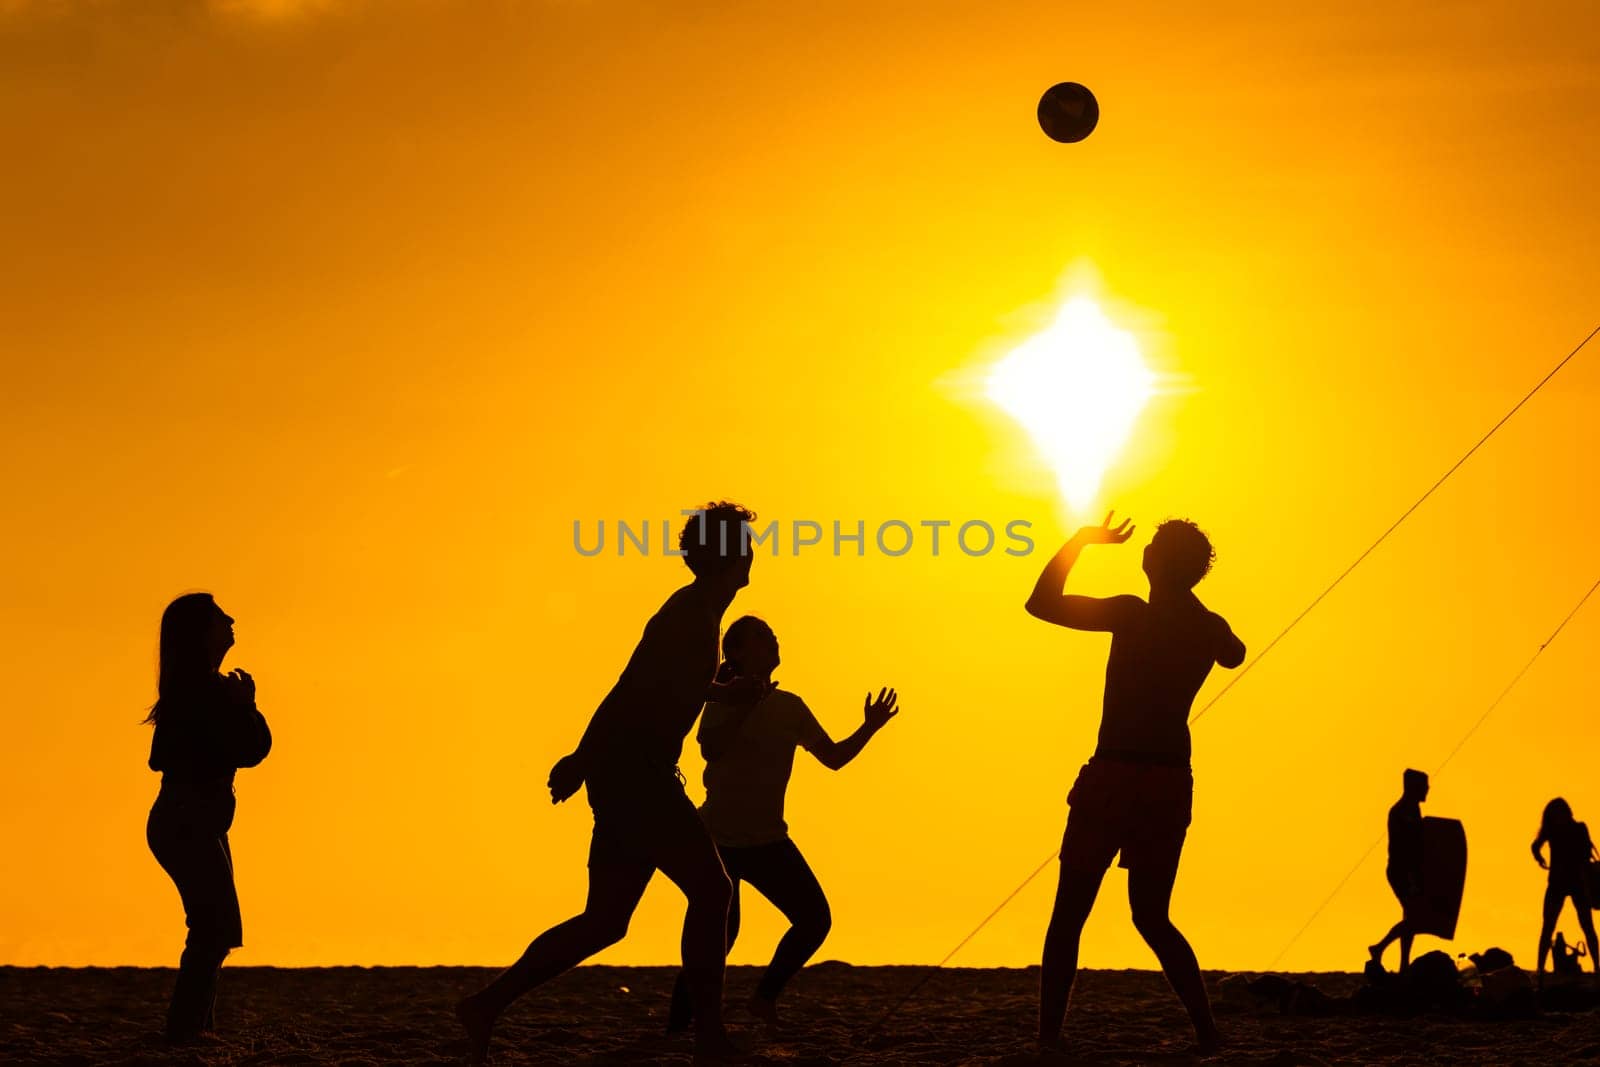 A group of people standing on top of a beach and playing voleiball